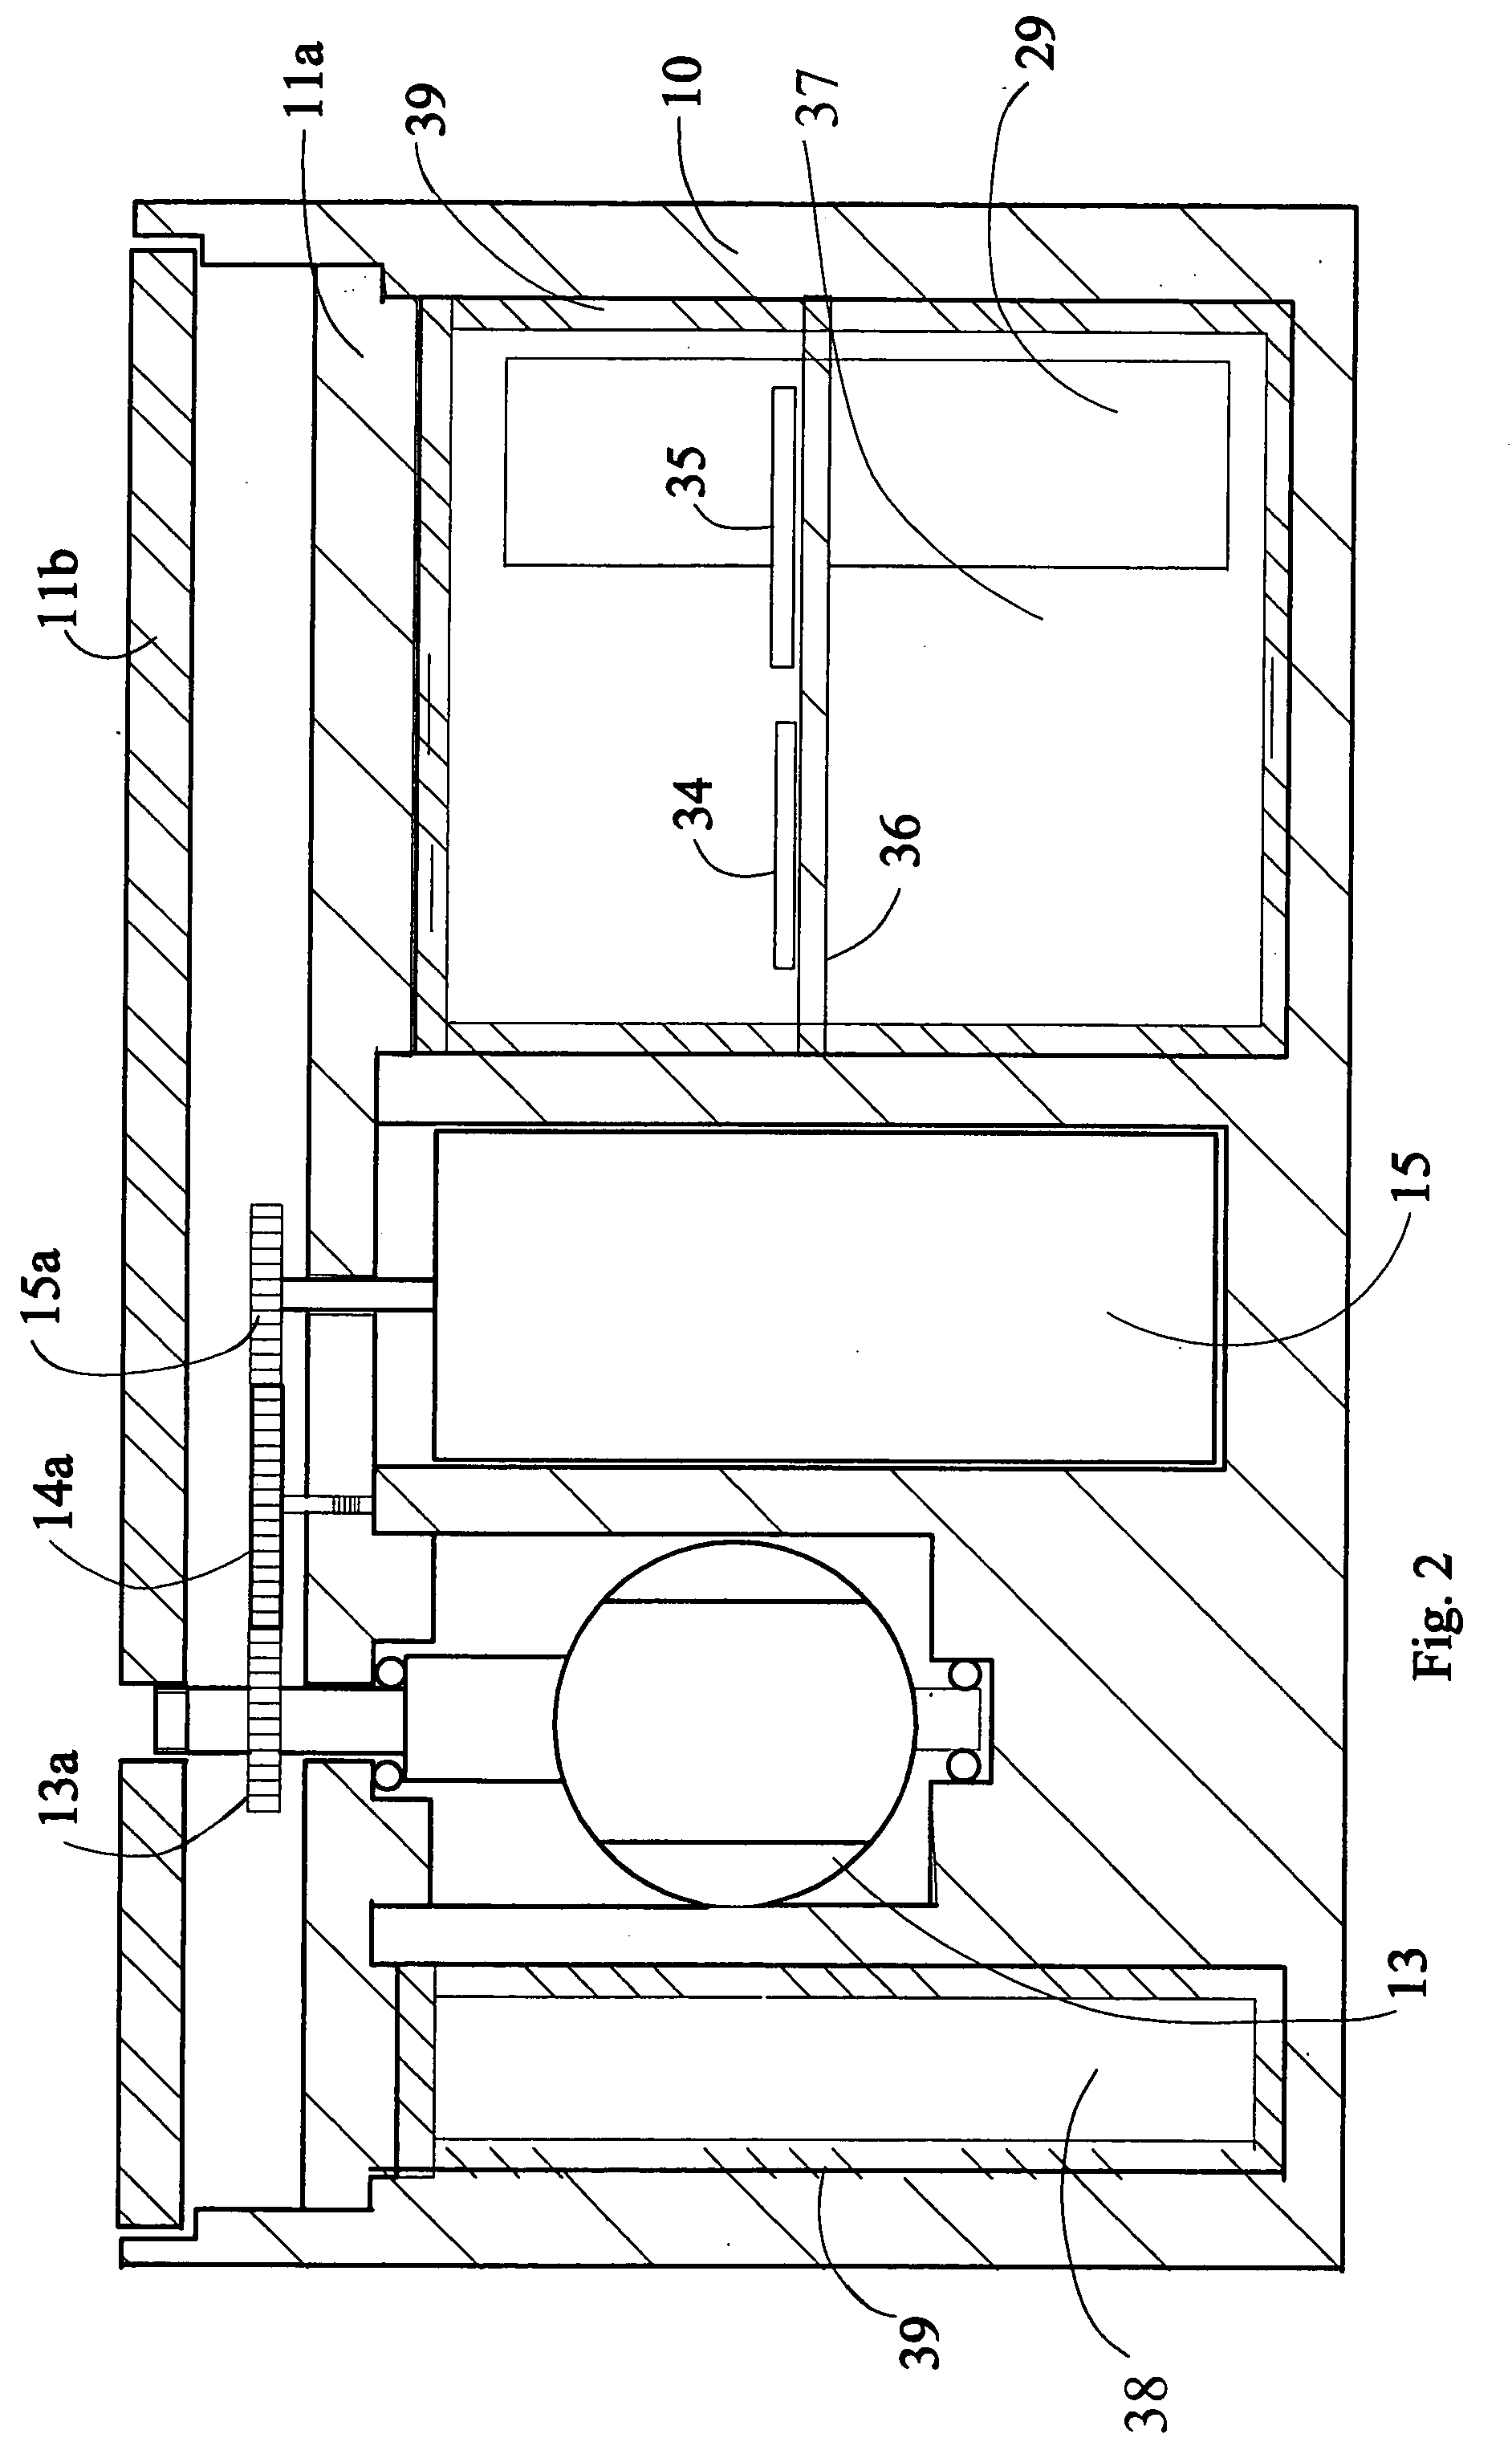 Remotely operated self-powerd gas safety valve